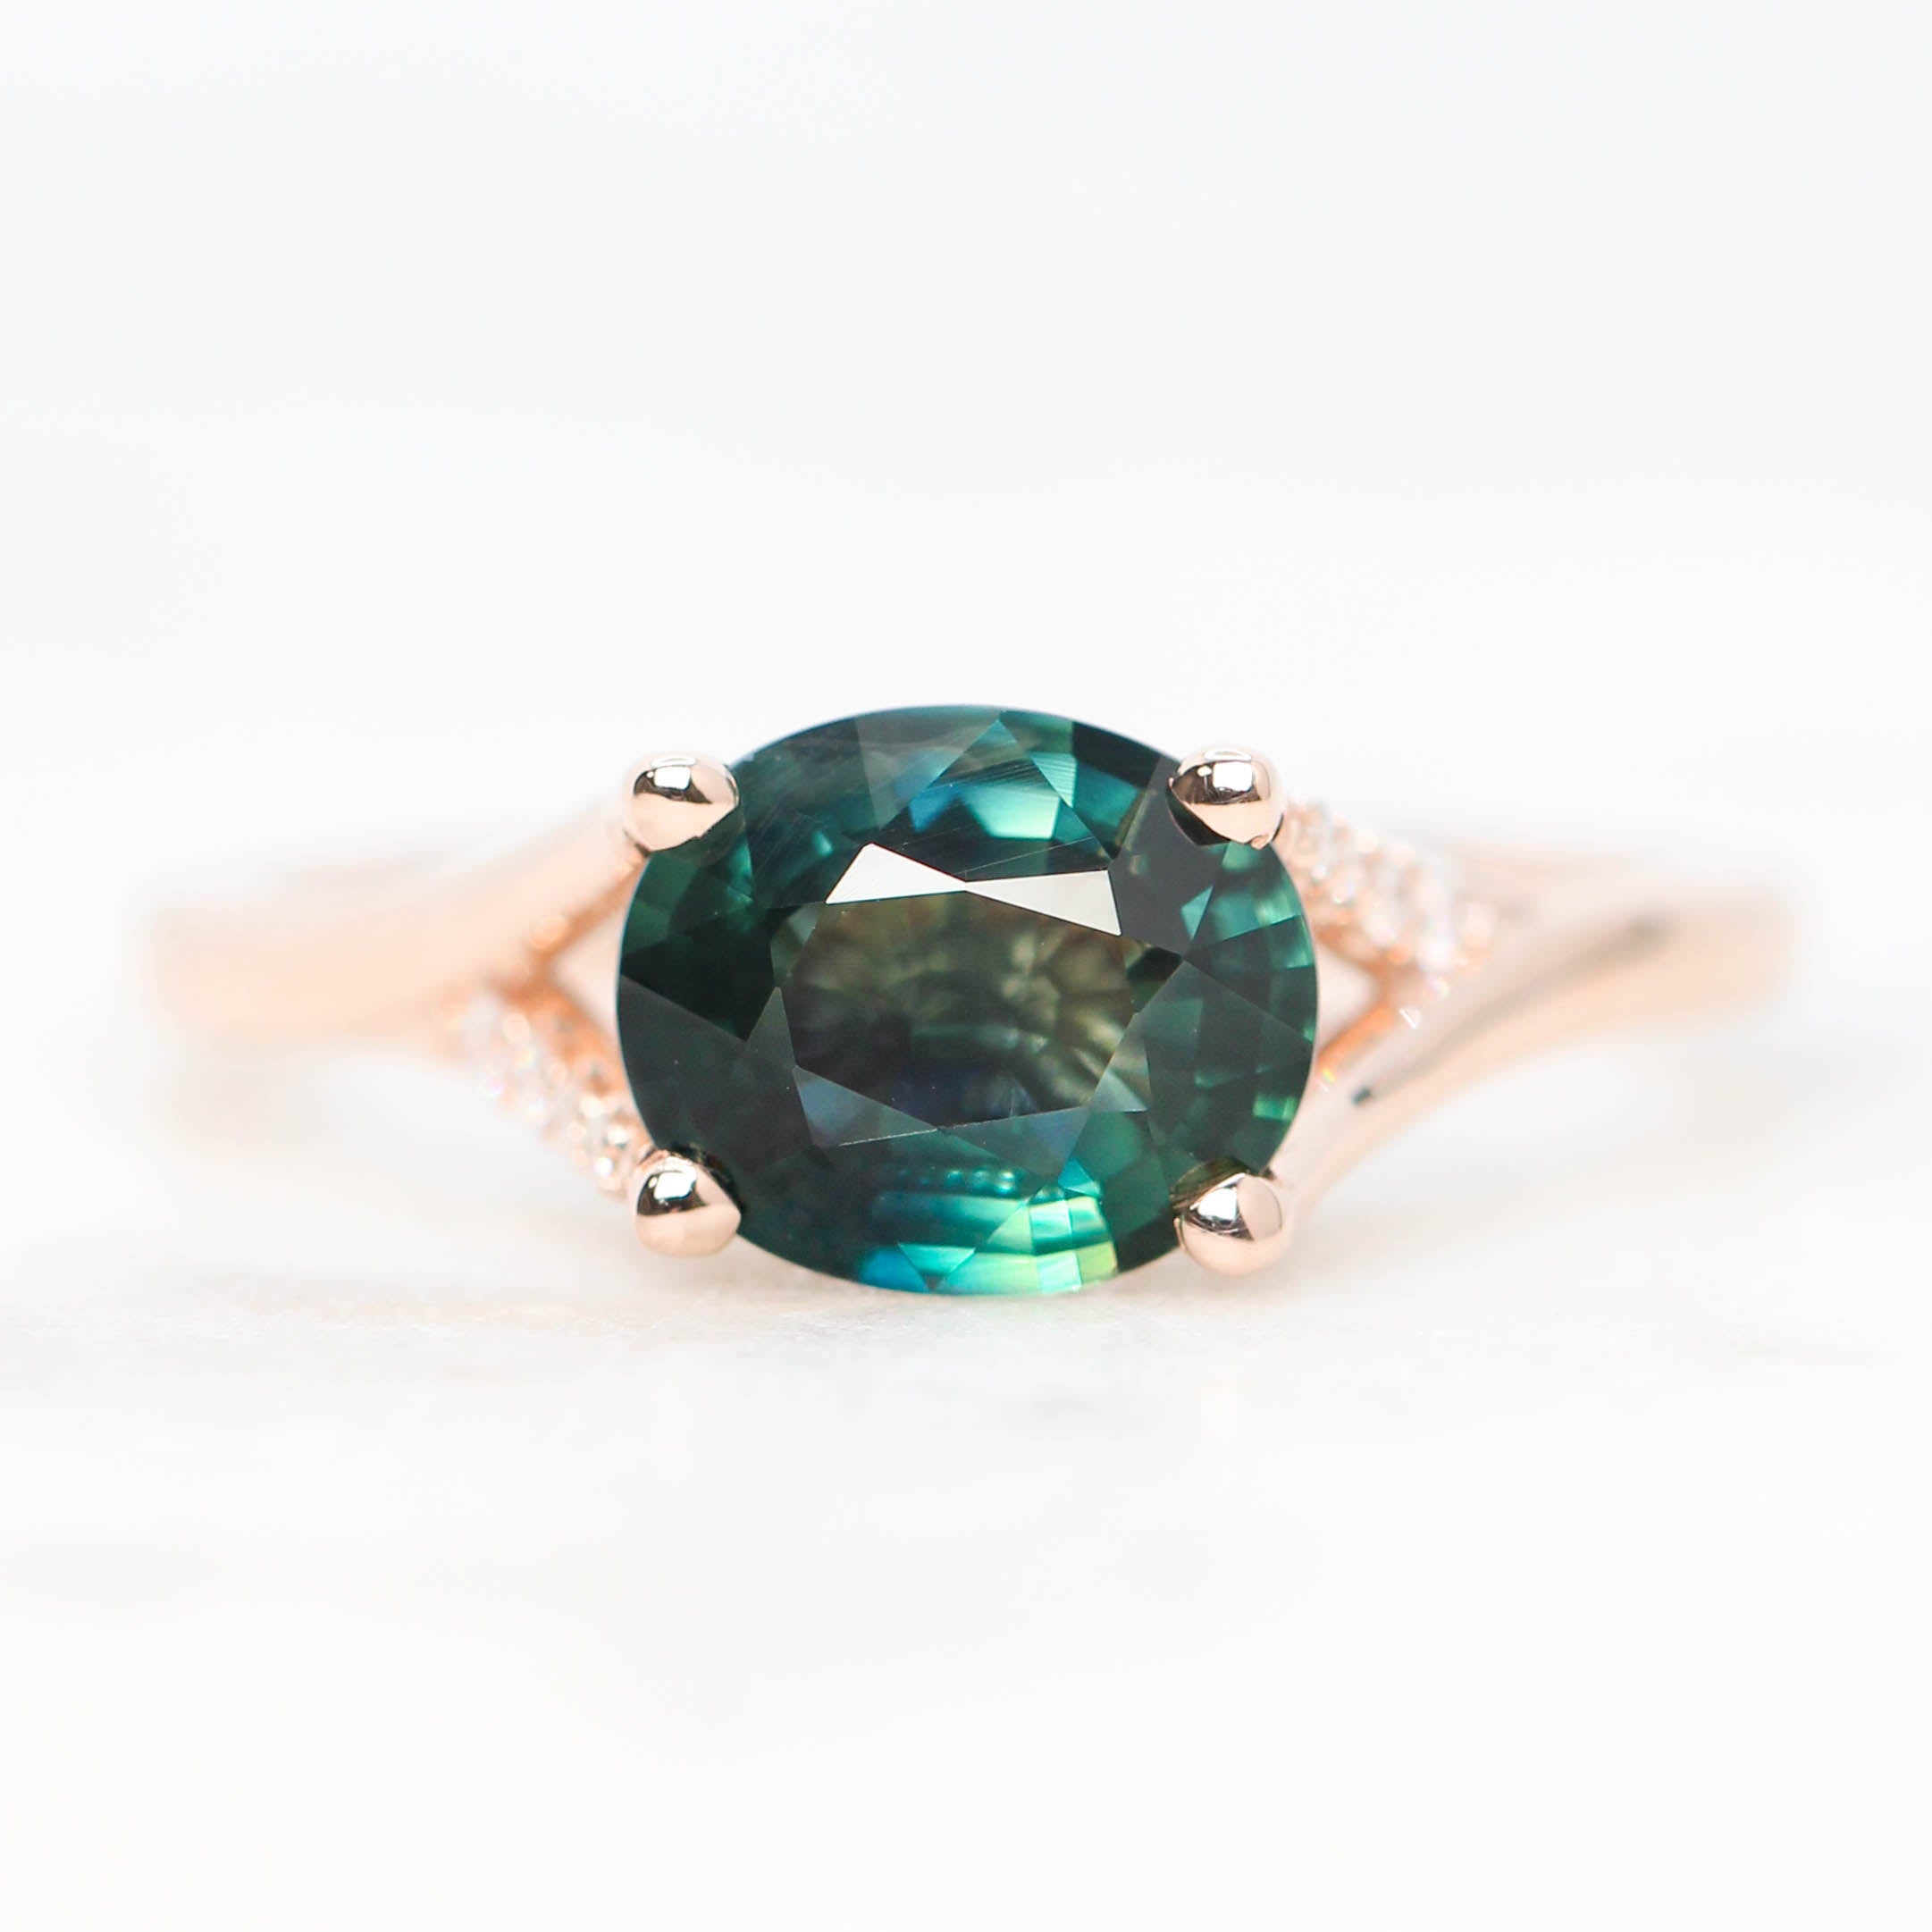 Kennedy Ring with a 2.12 Carat Oval Teal Sapphire and White Accent Diamonds in 14k Rose Gold - Ready to Size and Ship - Midwinter Co. Alternative Bridal Rings and Modern Fine Jewelry